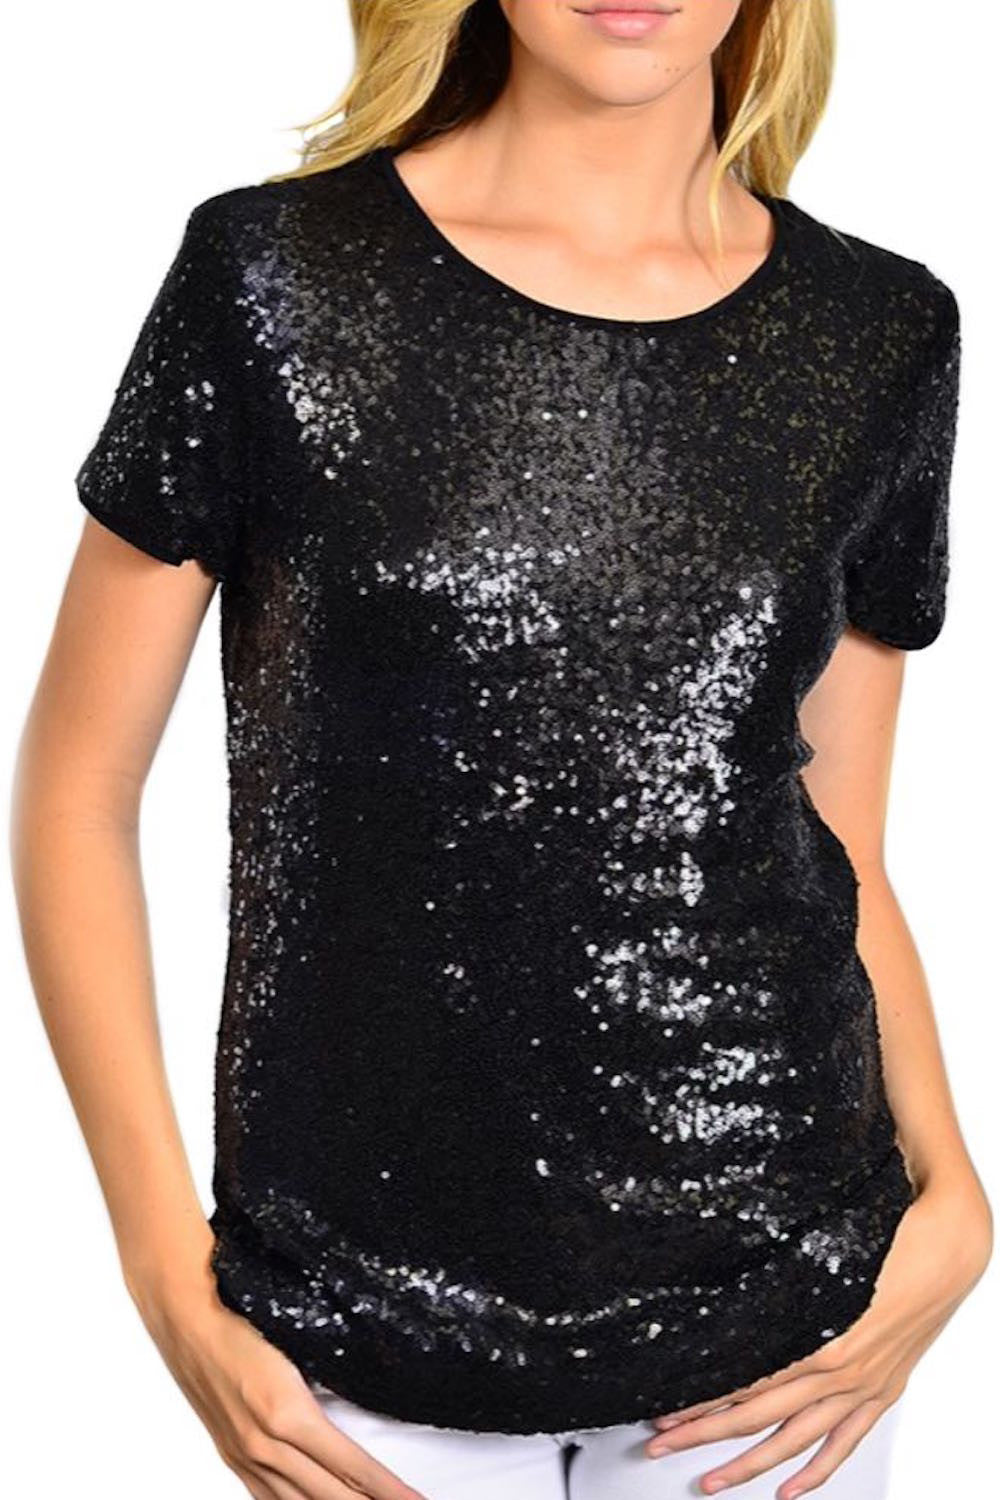 Black Short Sleeve Sequin Top with 